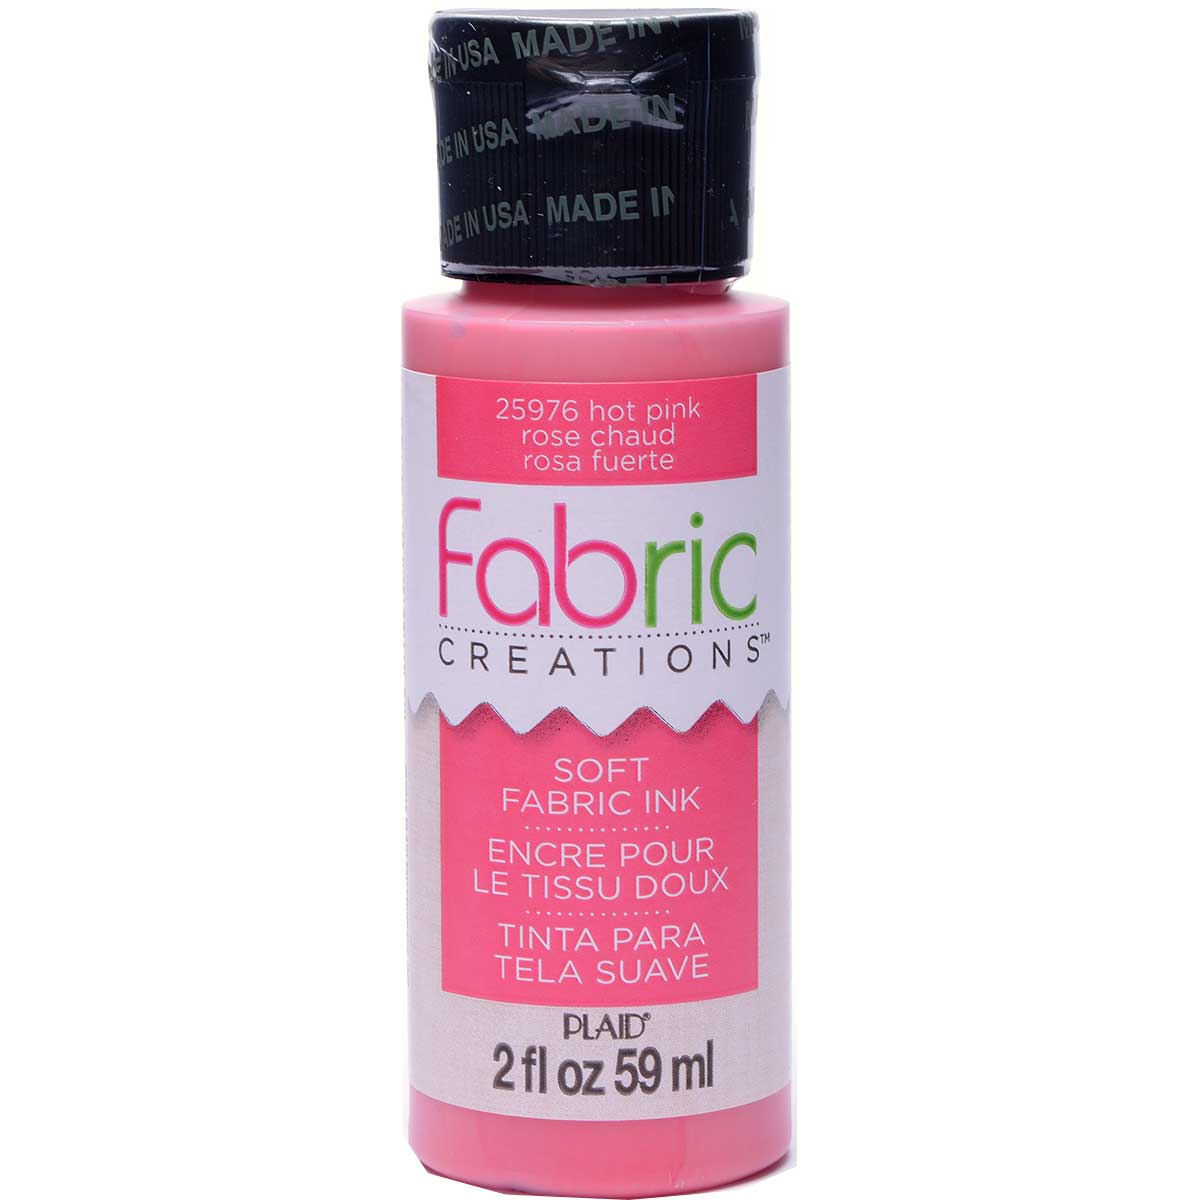 Fabric Creations™ Soft Fabric Inks - Hot Pink, 2 oz. - 25976